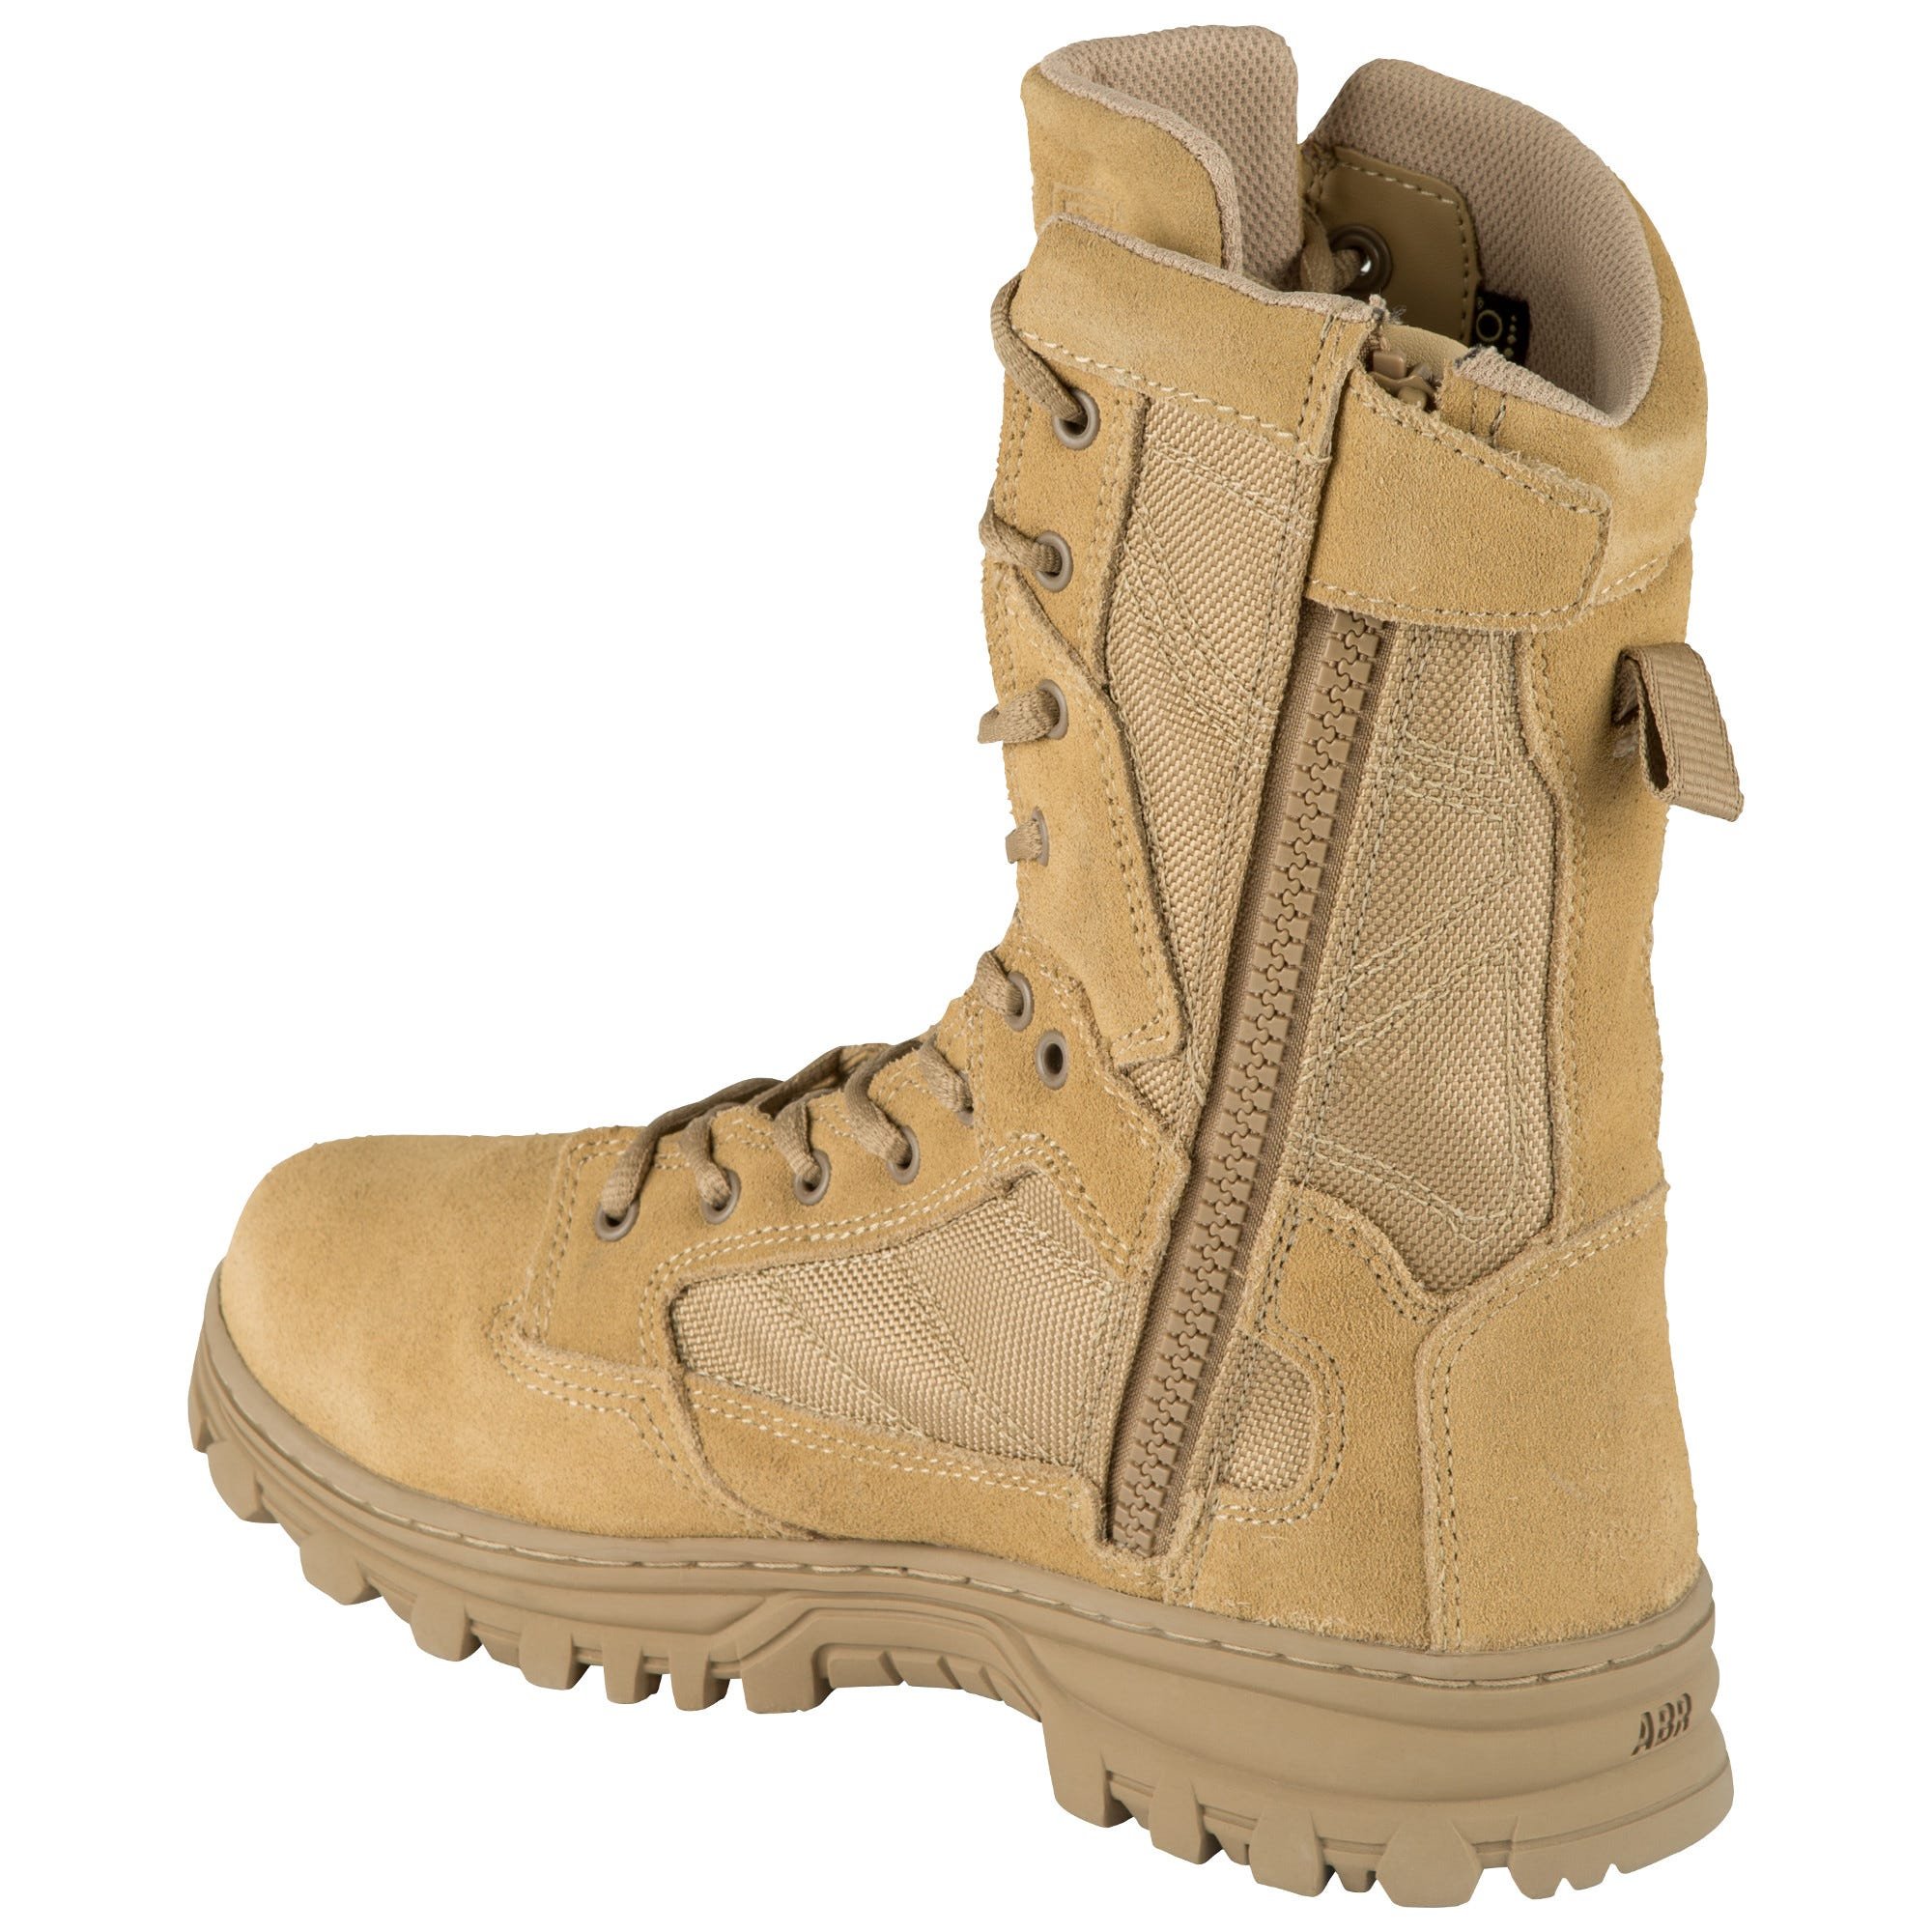 5.11 Work Gear EVO 8-Inch Waterproof Boots, Oil/Slip-Resistant, OrthoLite Insole, Coyote, 15/Regular, Style 12347 - image 2 of 4